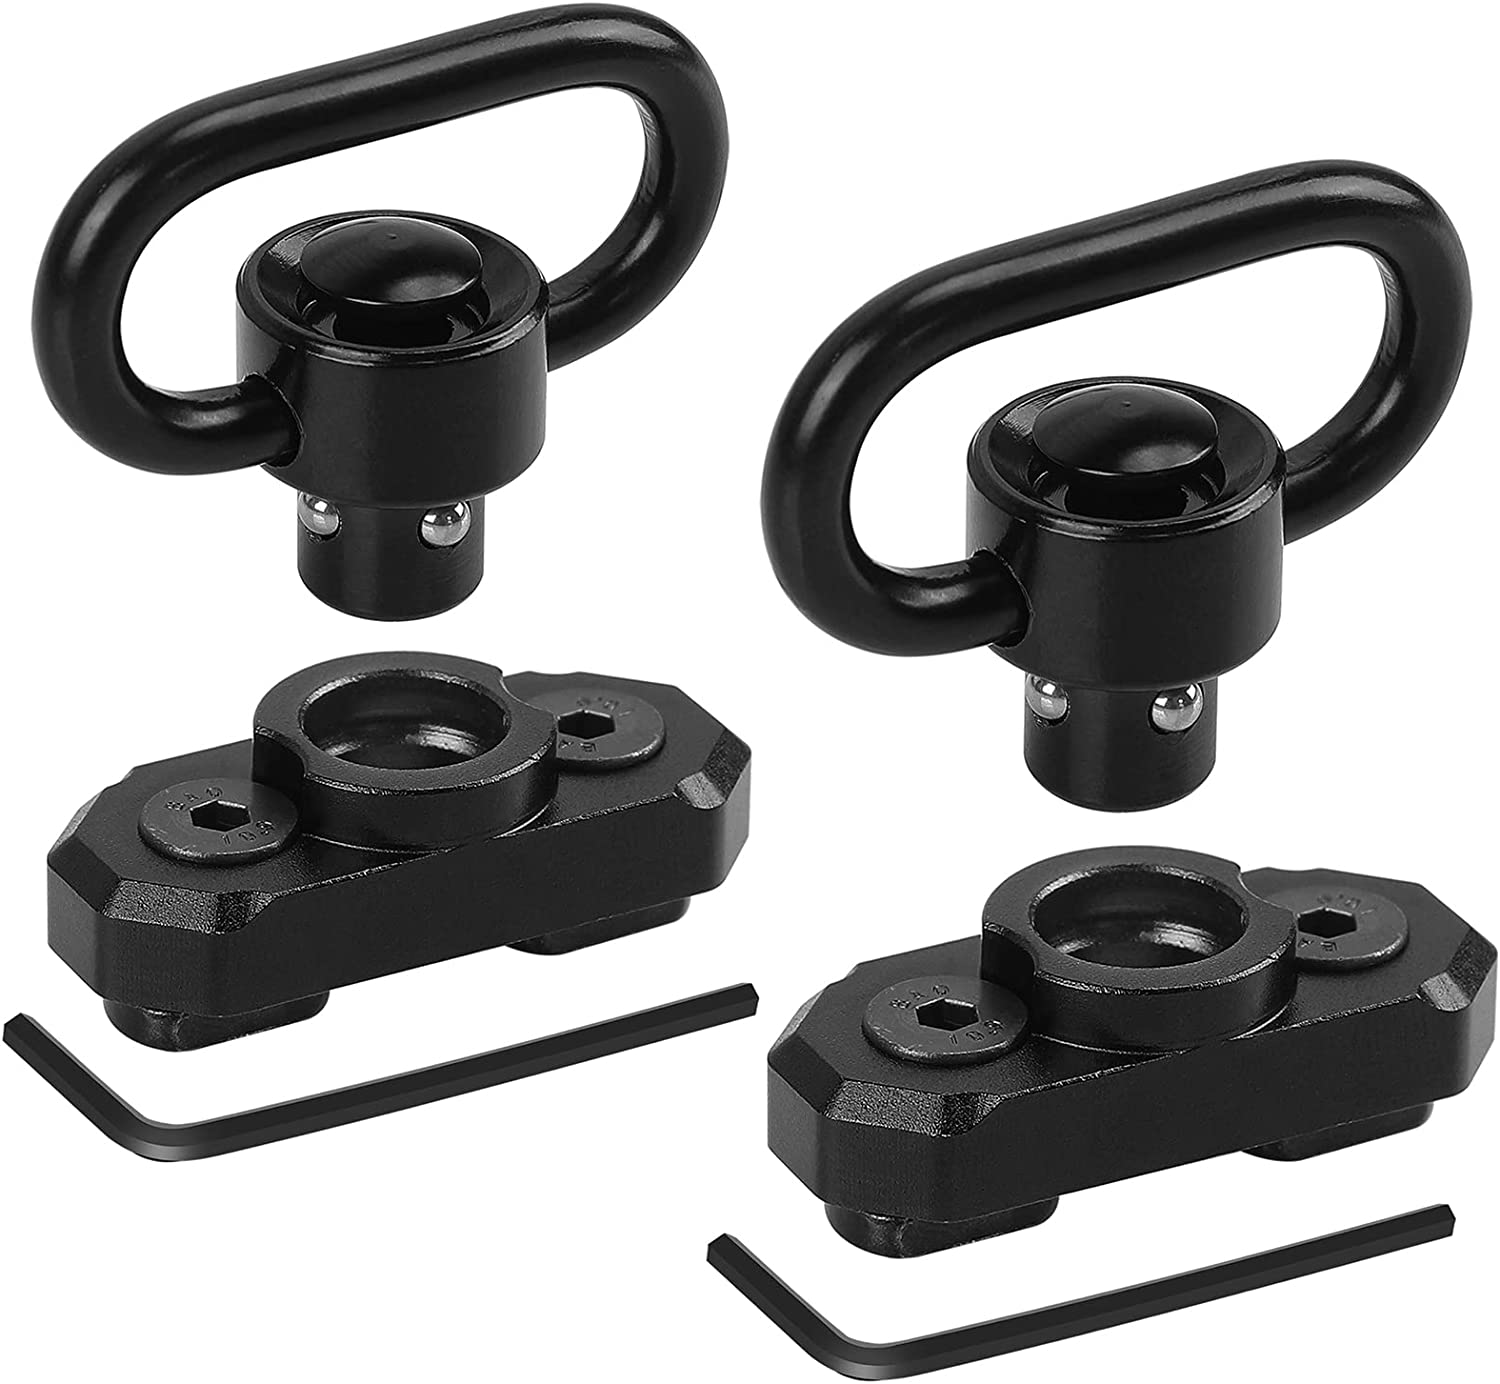 FANGOSS Two Point and Traditional Mlock Sling Rail Mounts with 1.25 Inch QD  Push Button Sling Swivel Loop for Mloc - 2 Pack